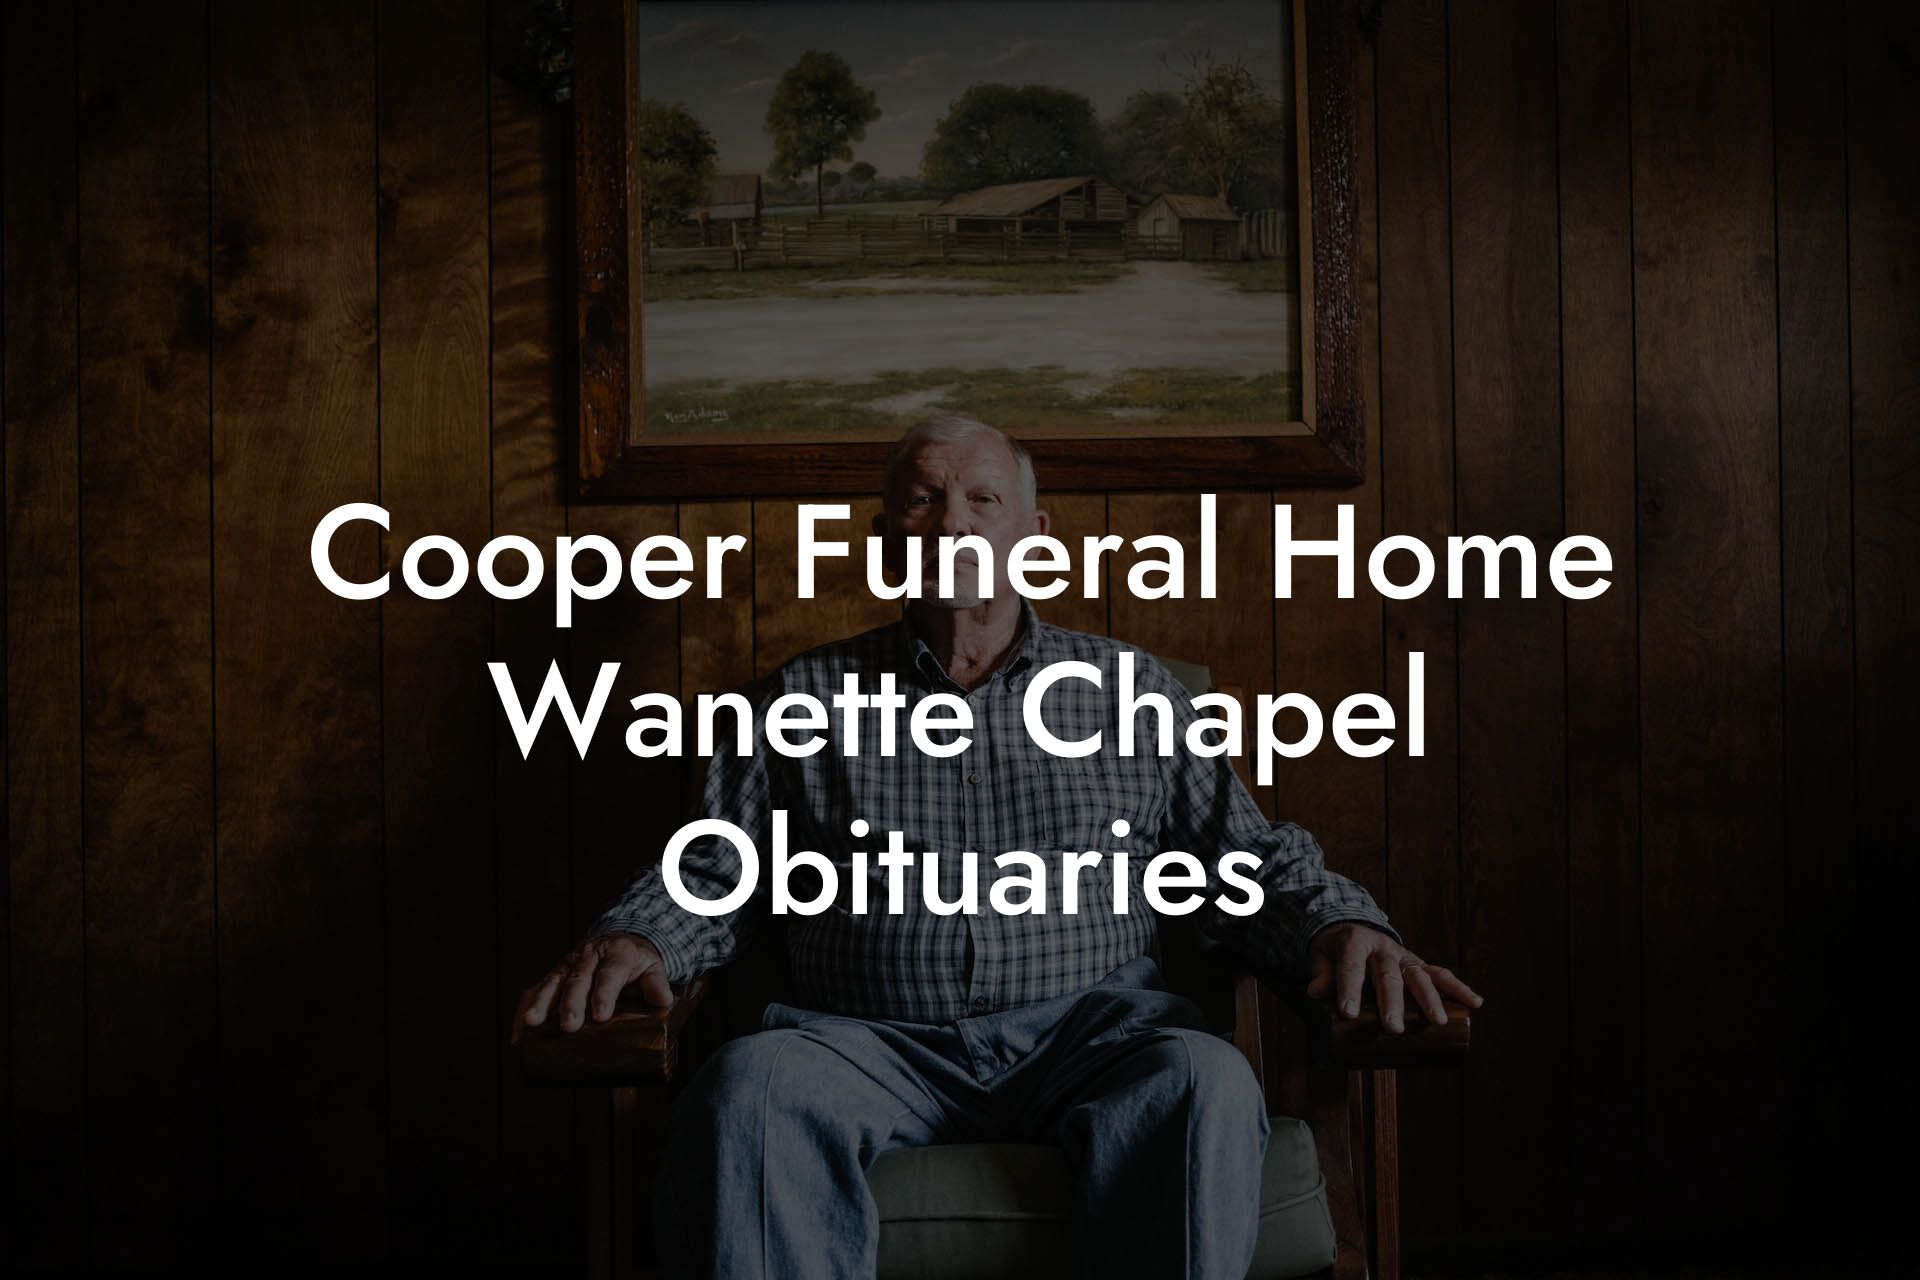 Cooper Funeral Home Wanette Chapel Obituaries - Eulogy Assistant